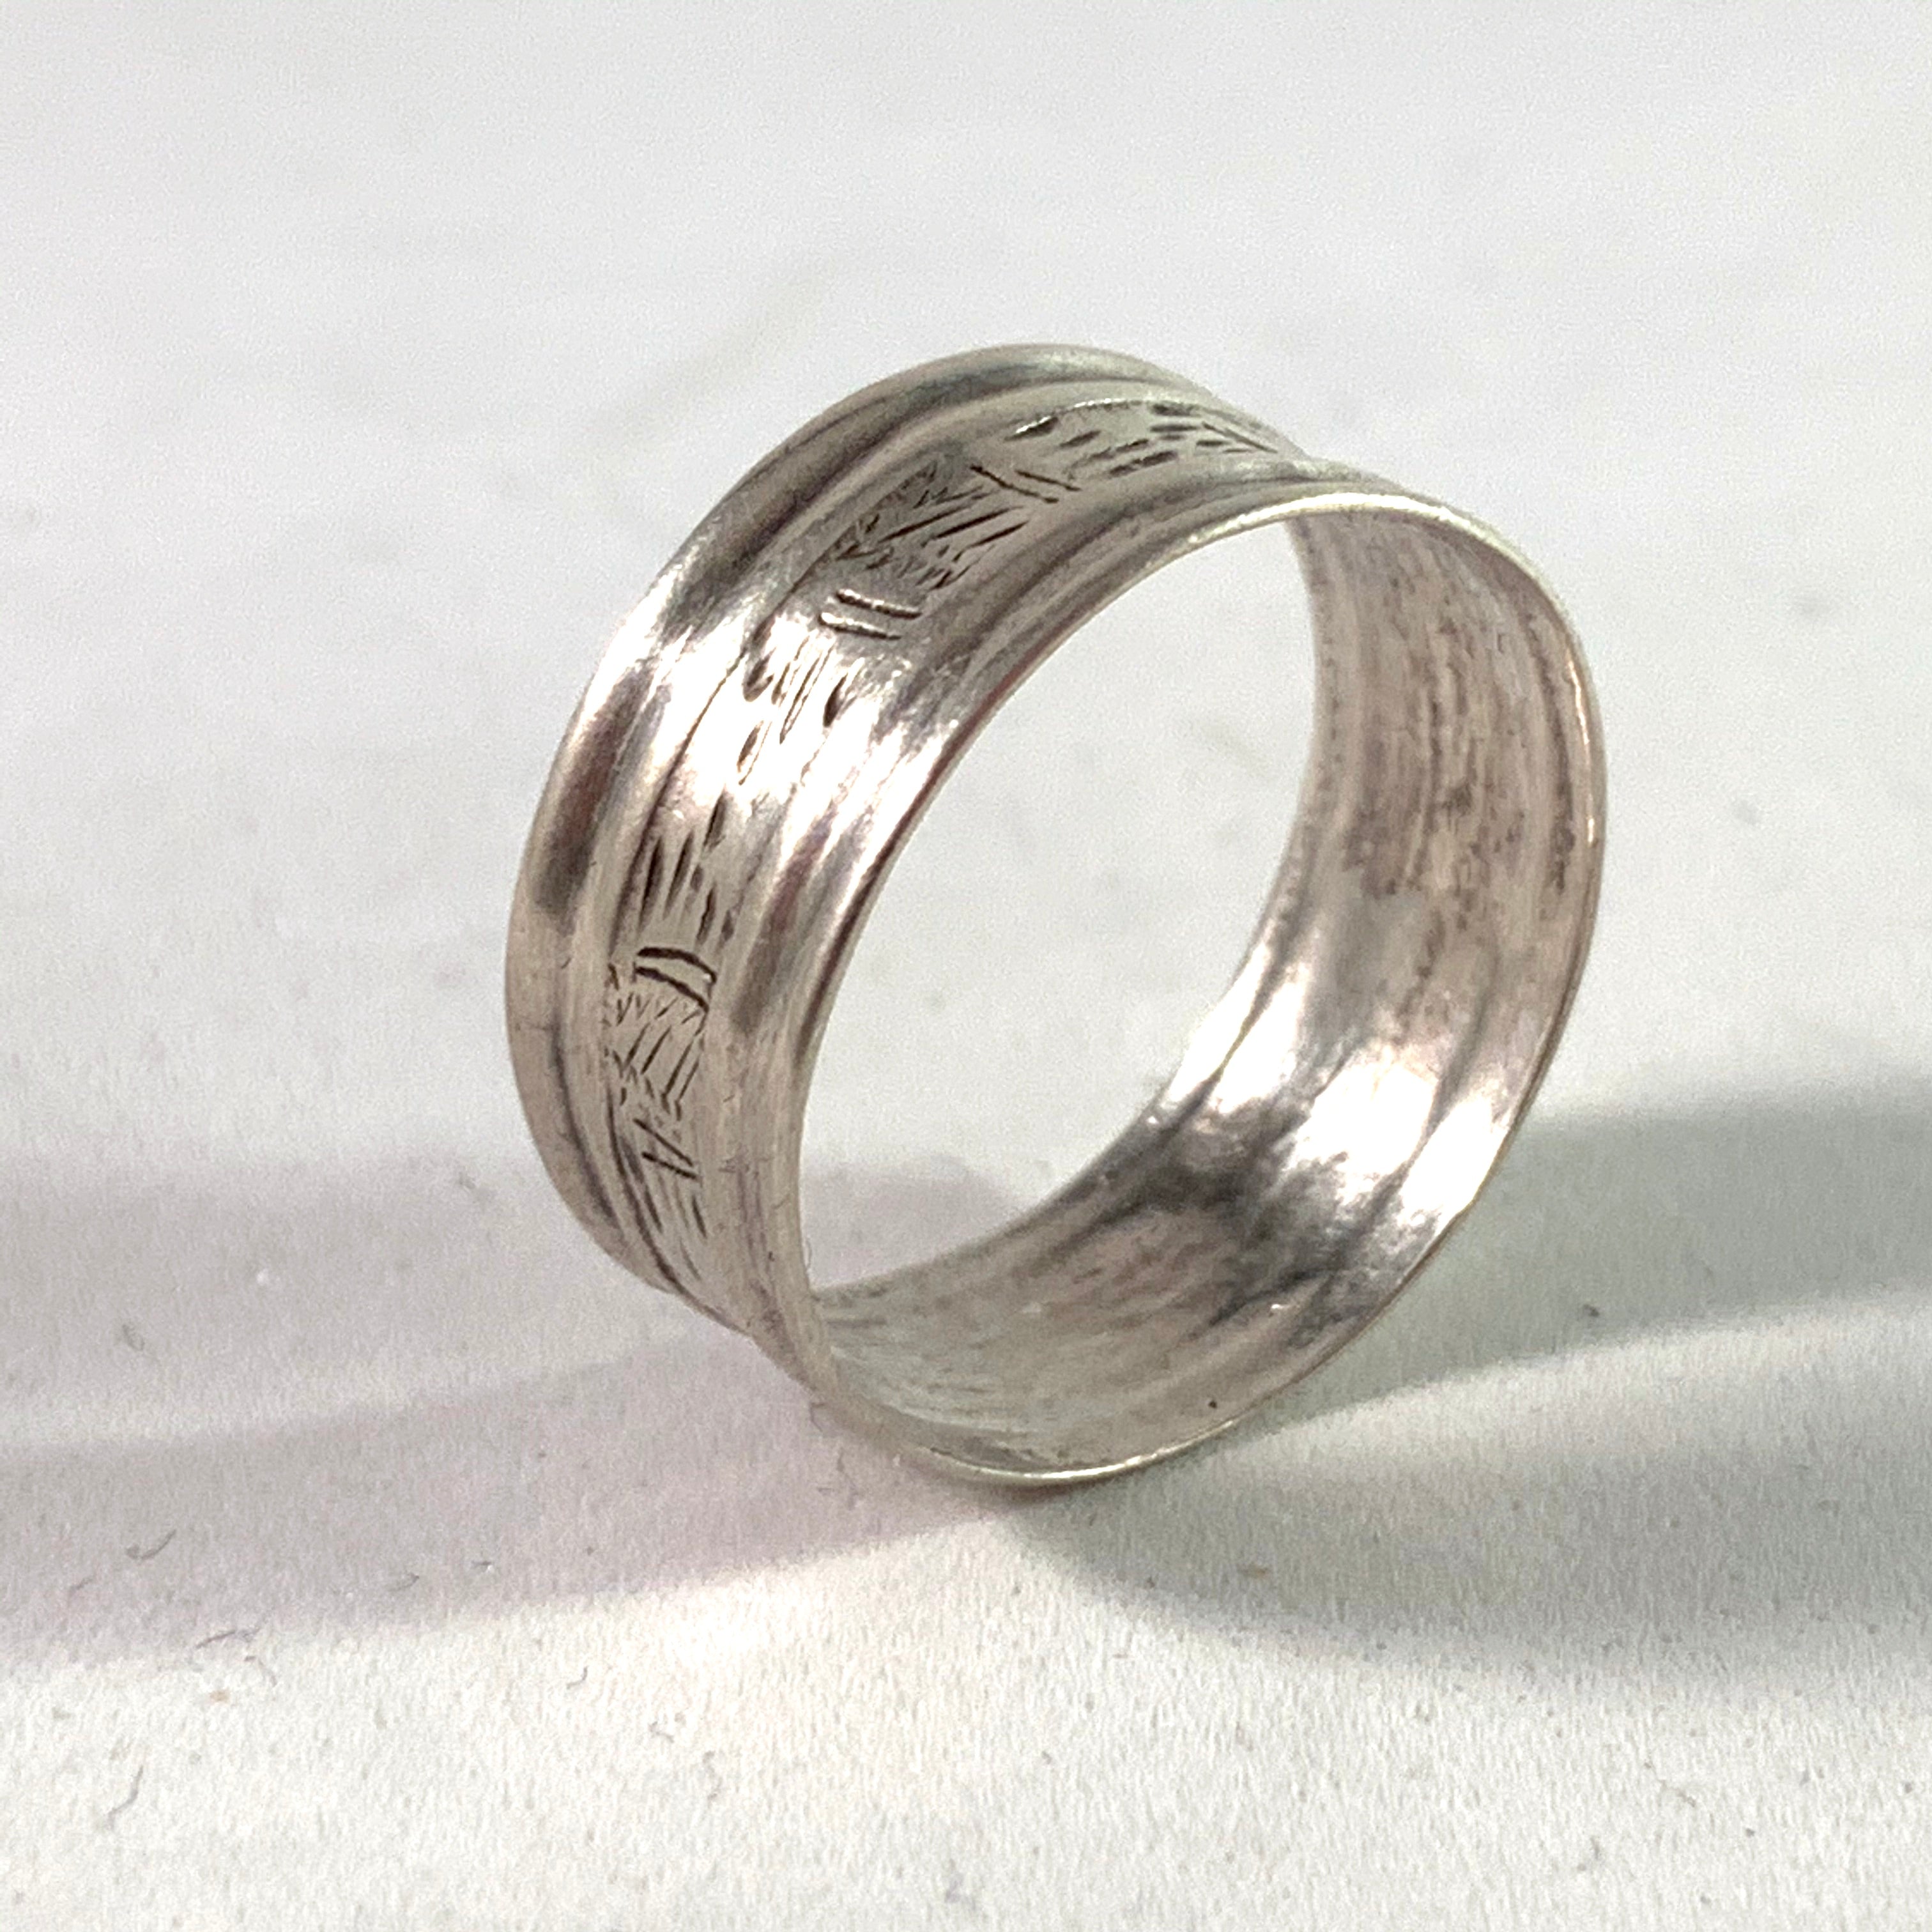 Anders Bollwij, Sweden year 1859 Solid Silver Wedding Band Ring.